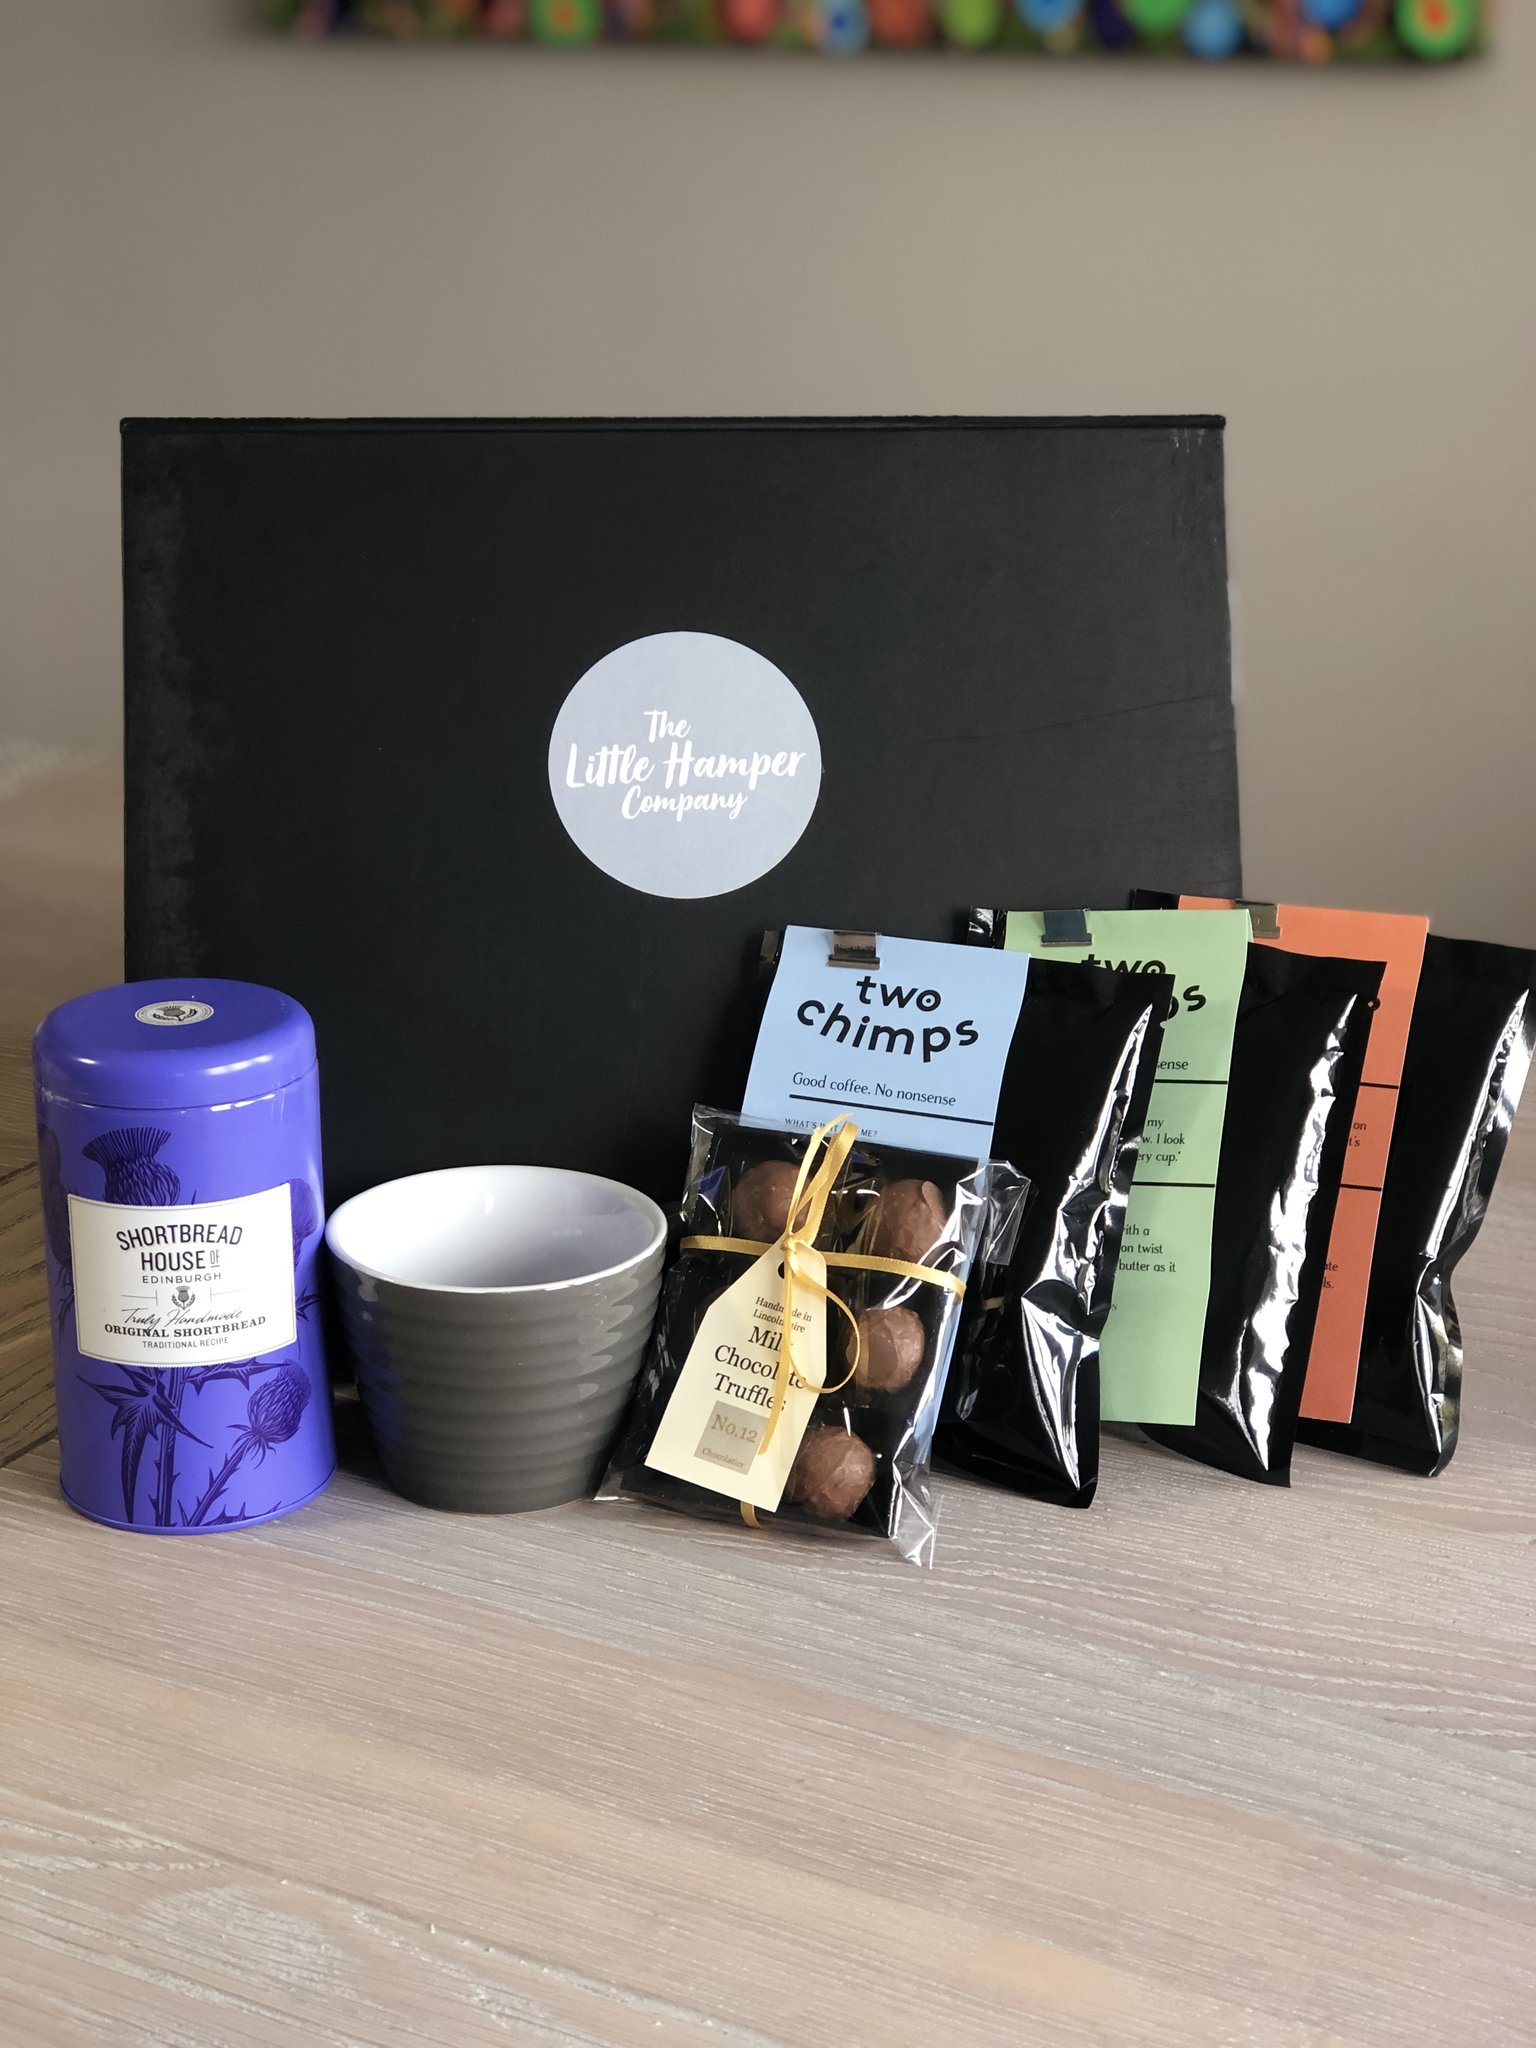 The Little Hamper Company Coffee Hamper For Him. Sharing independent shops online at Love Our Shops UK shopping directory.